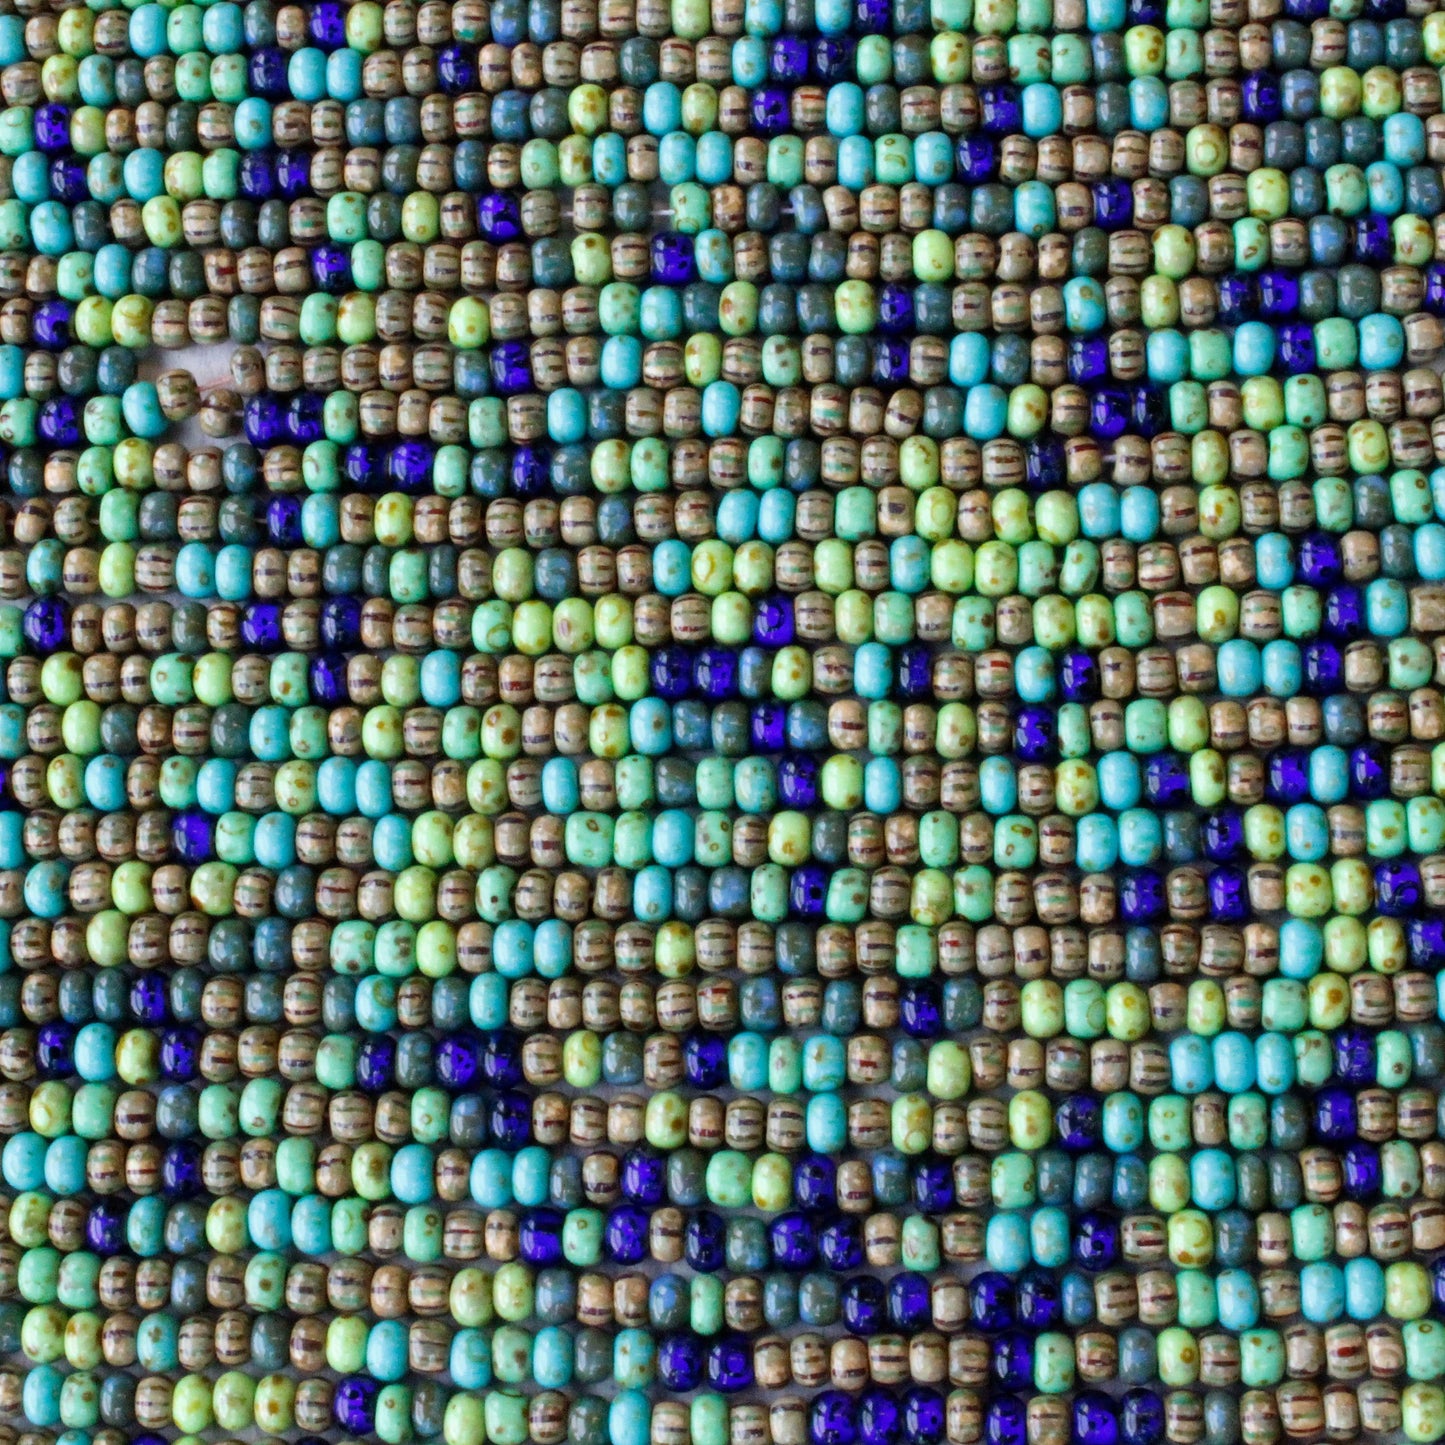 Size 5 Seed Beads - Striped Tropical Mix - 20 or 60 inches